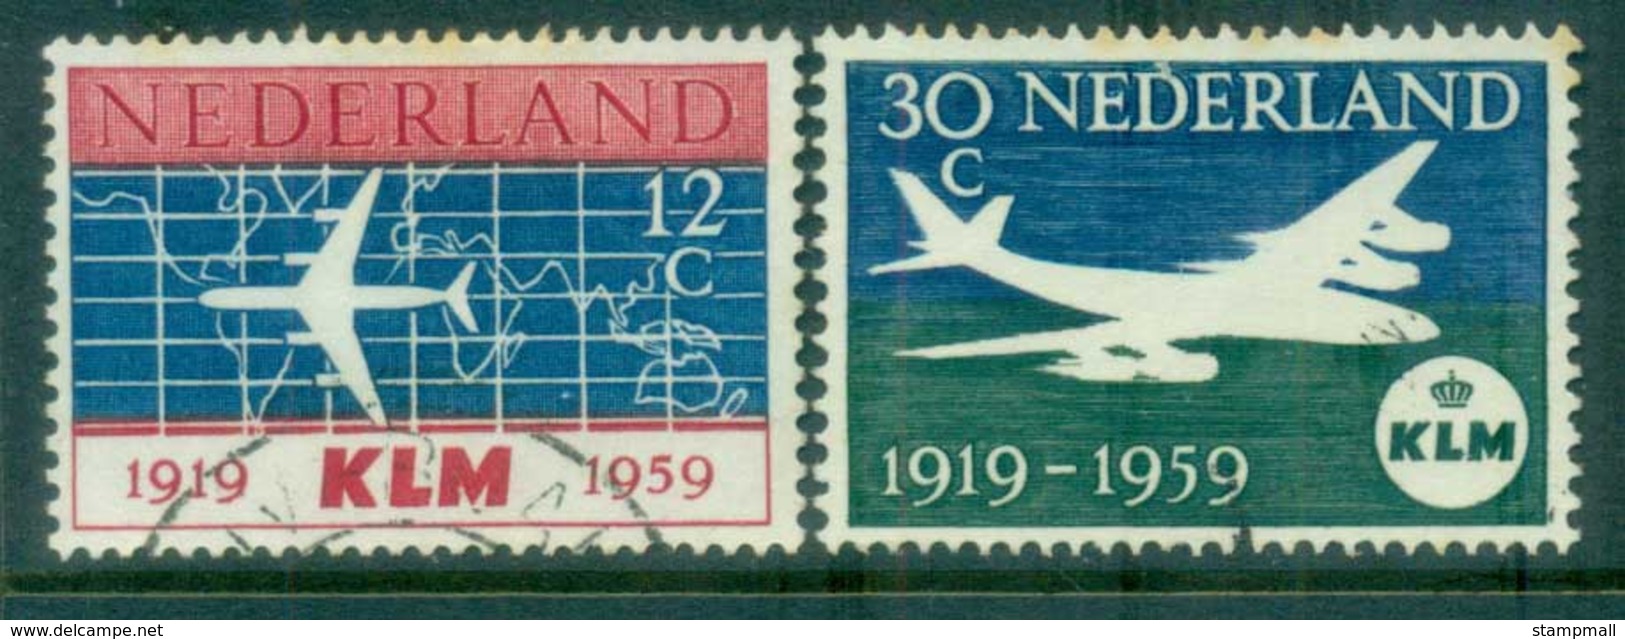 Netherlands 1959 KLM Airlines FU Lot76655 - Unclassified